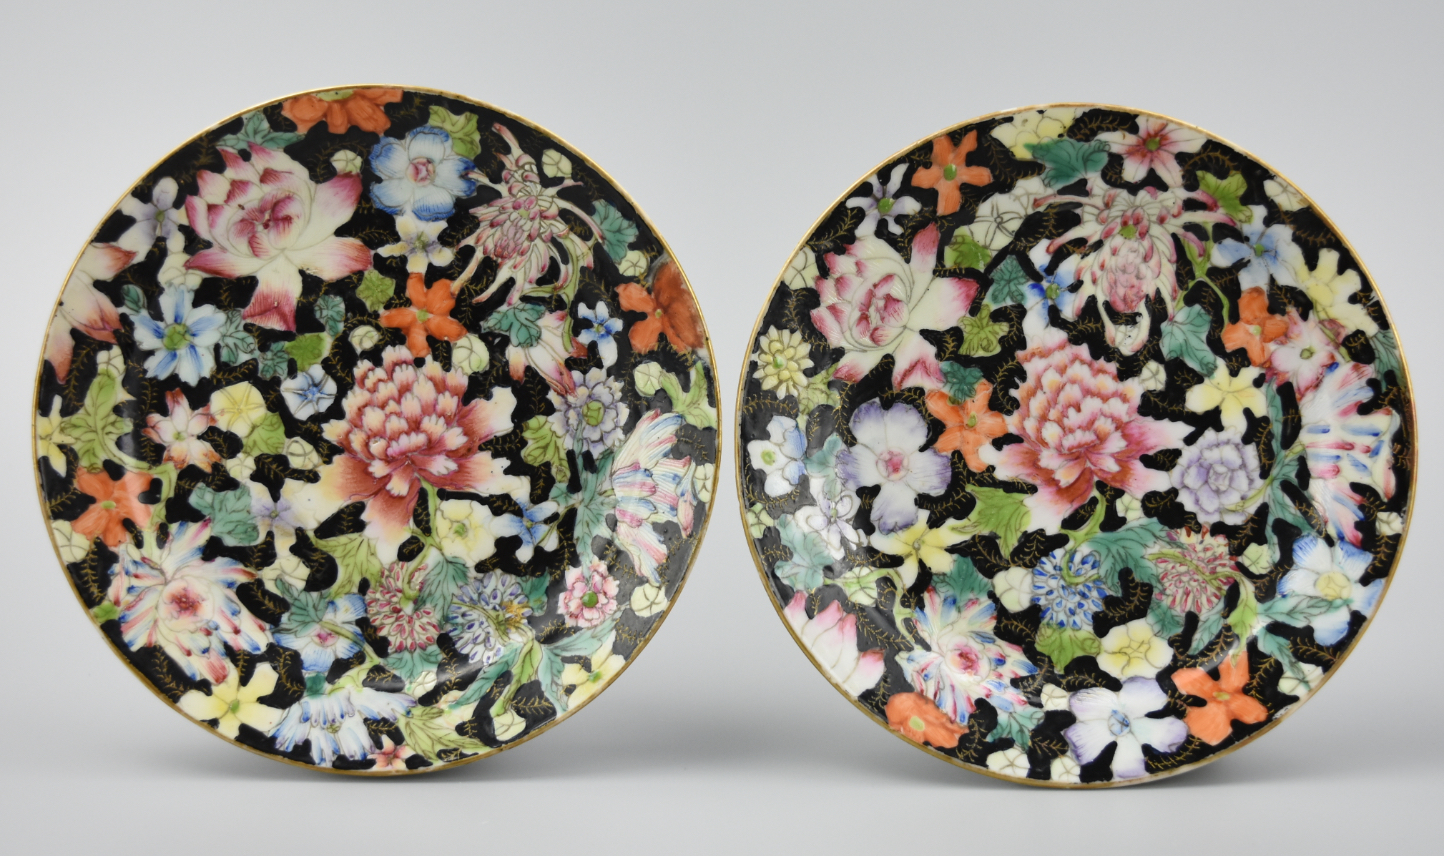 PAIR OF FAMILLE ROSE FLORAL SAUCERS 19 20TH 2cf760